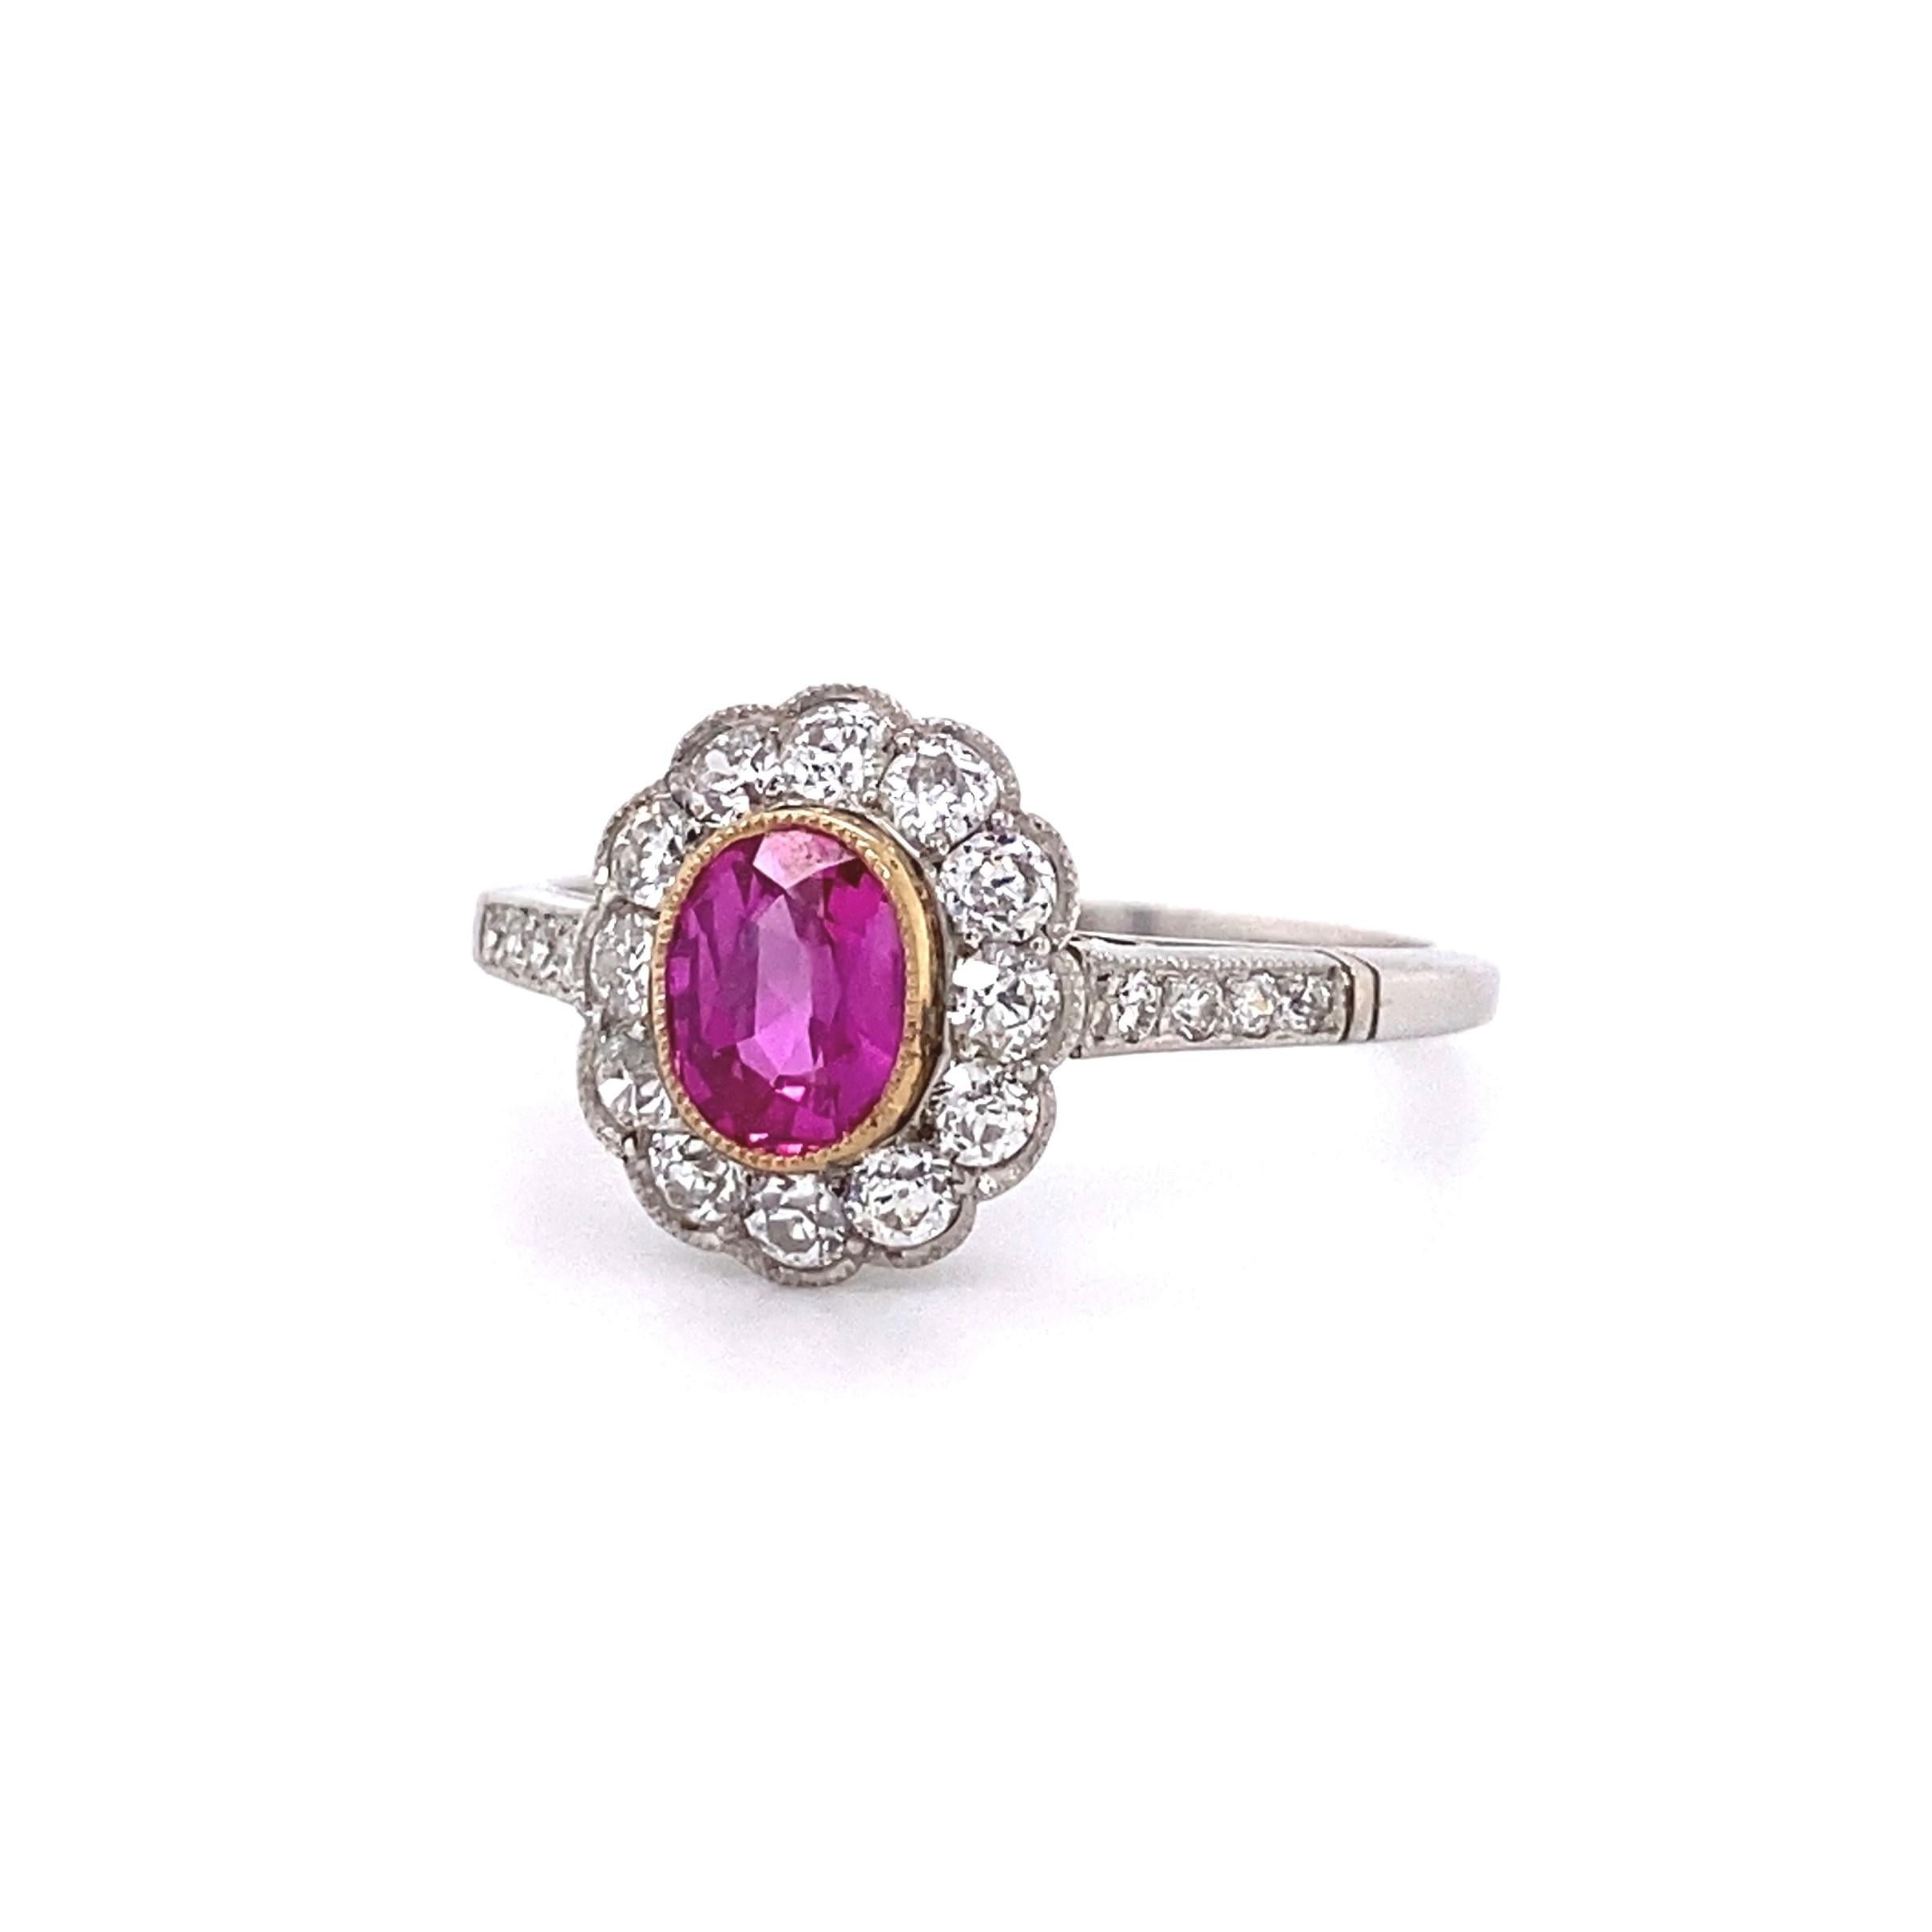 Mixed Cut Art Deco GIA Burma Ruby and Diamond Platinum Ring Estate Fine Jewelry For Sale